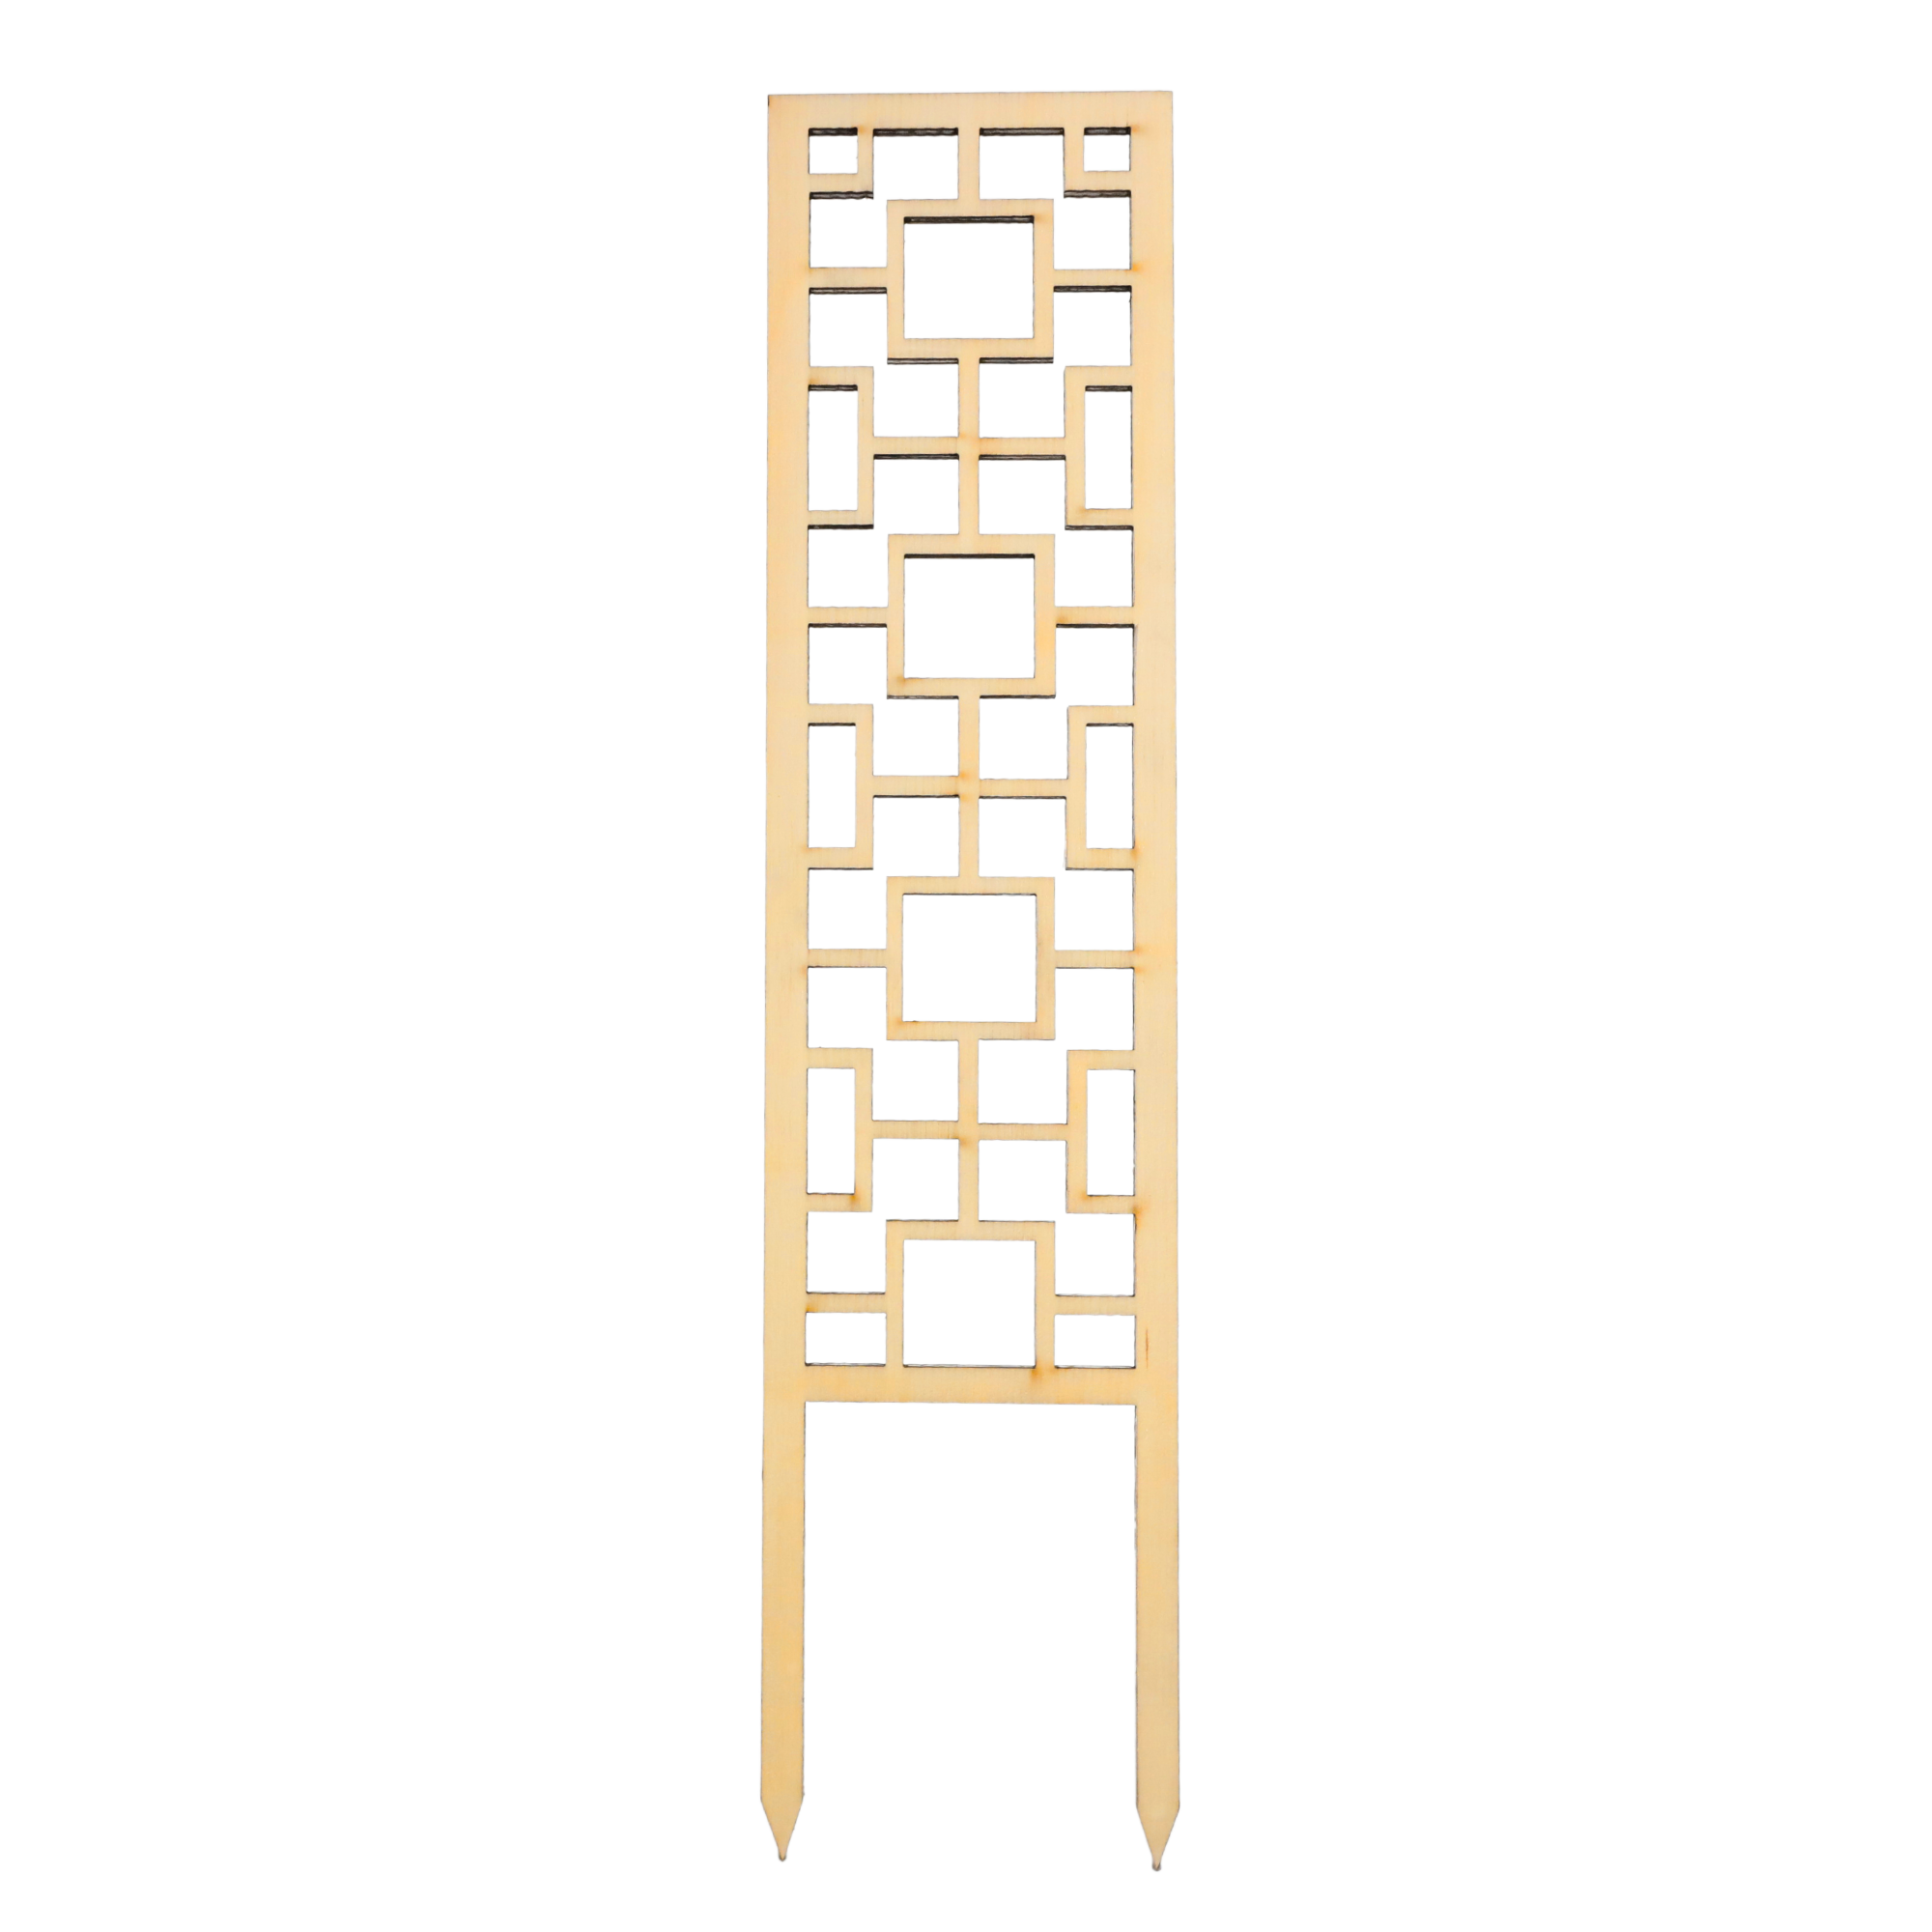 Tropical Squares Wooden Trellis - For Climbing Plants: Natural